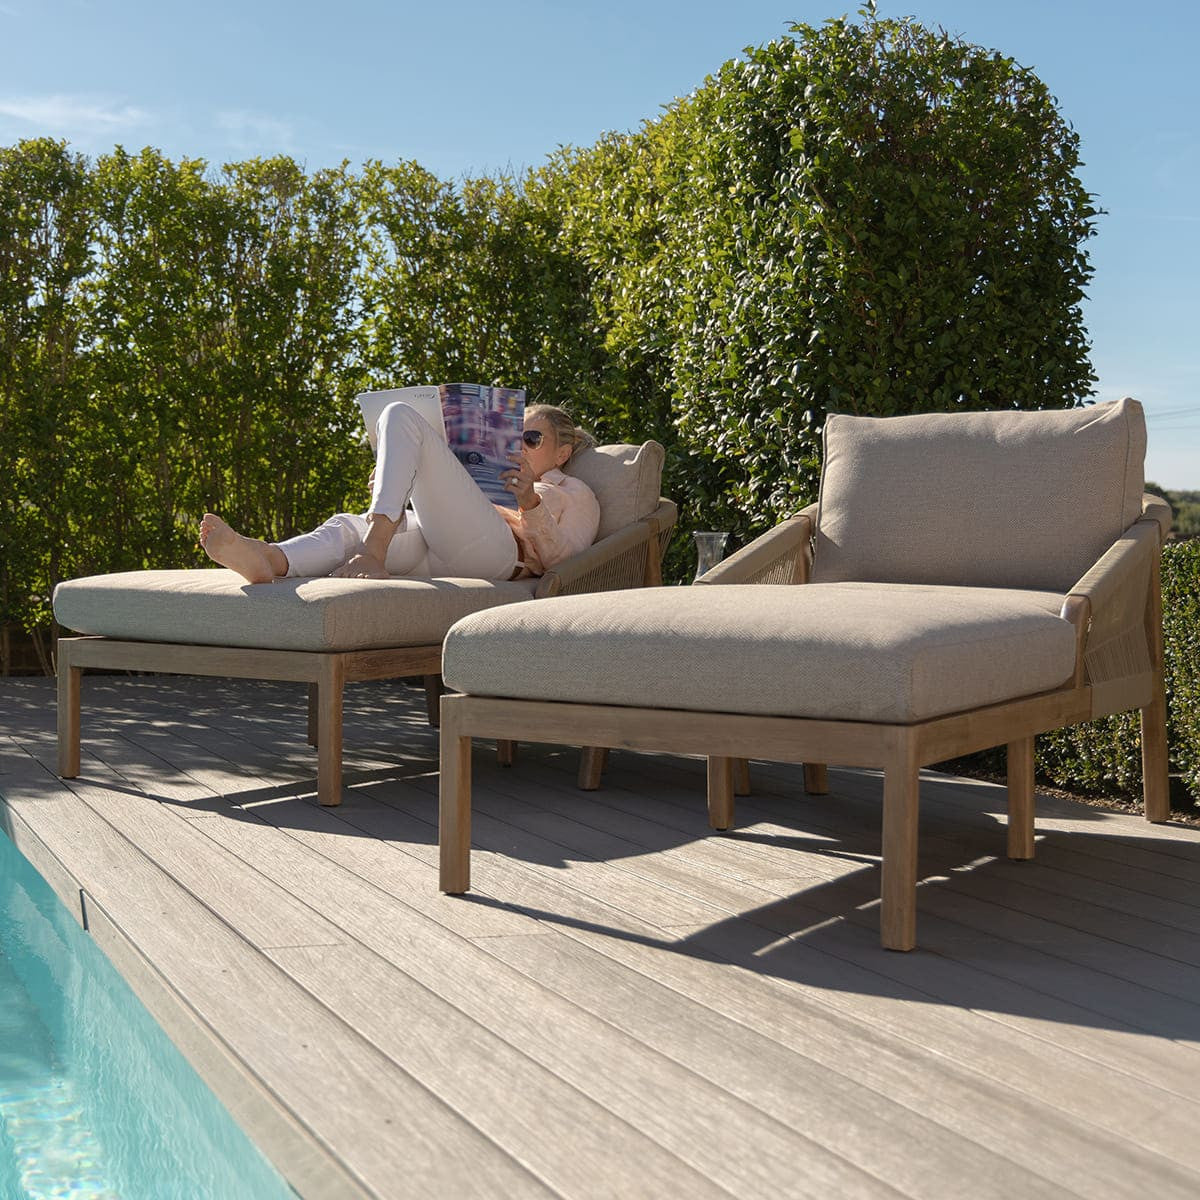 Maze Martinique Double Sunlounger Set-Better Bed Company